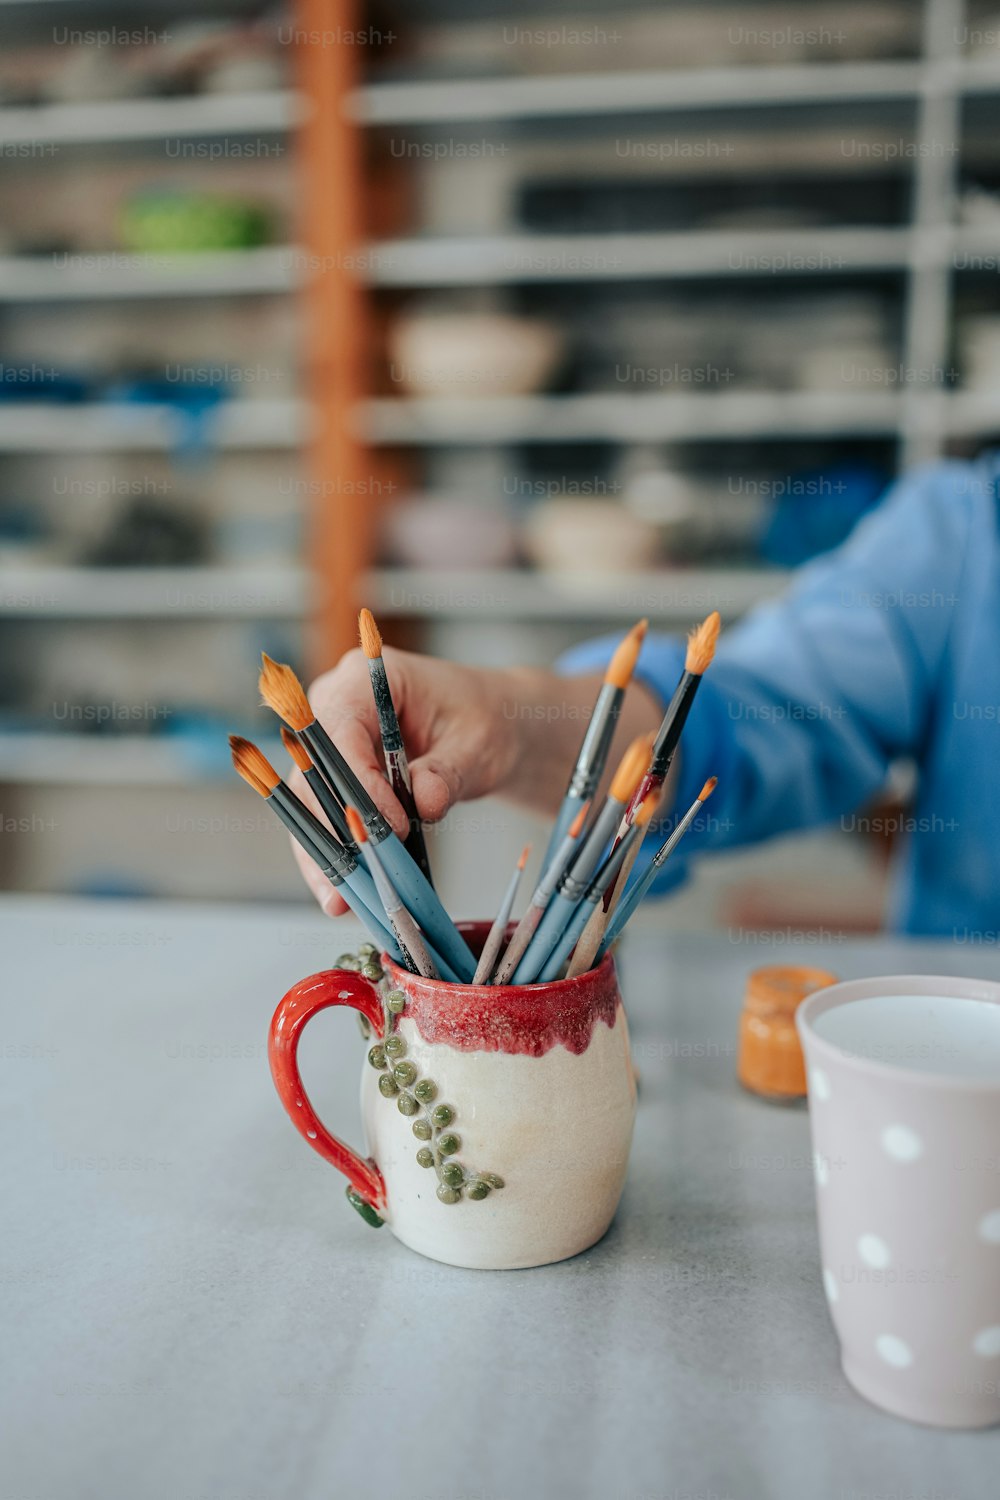 a person holding a cup with paint brushes in it